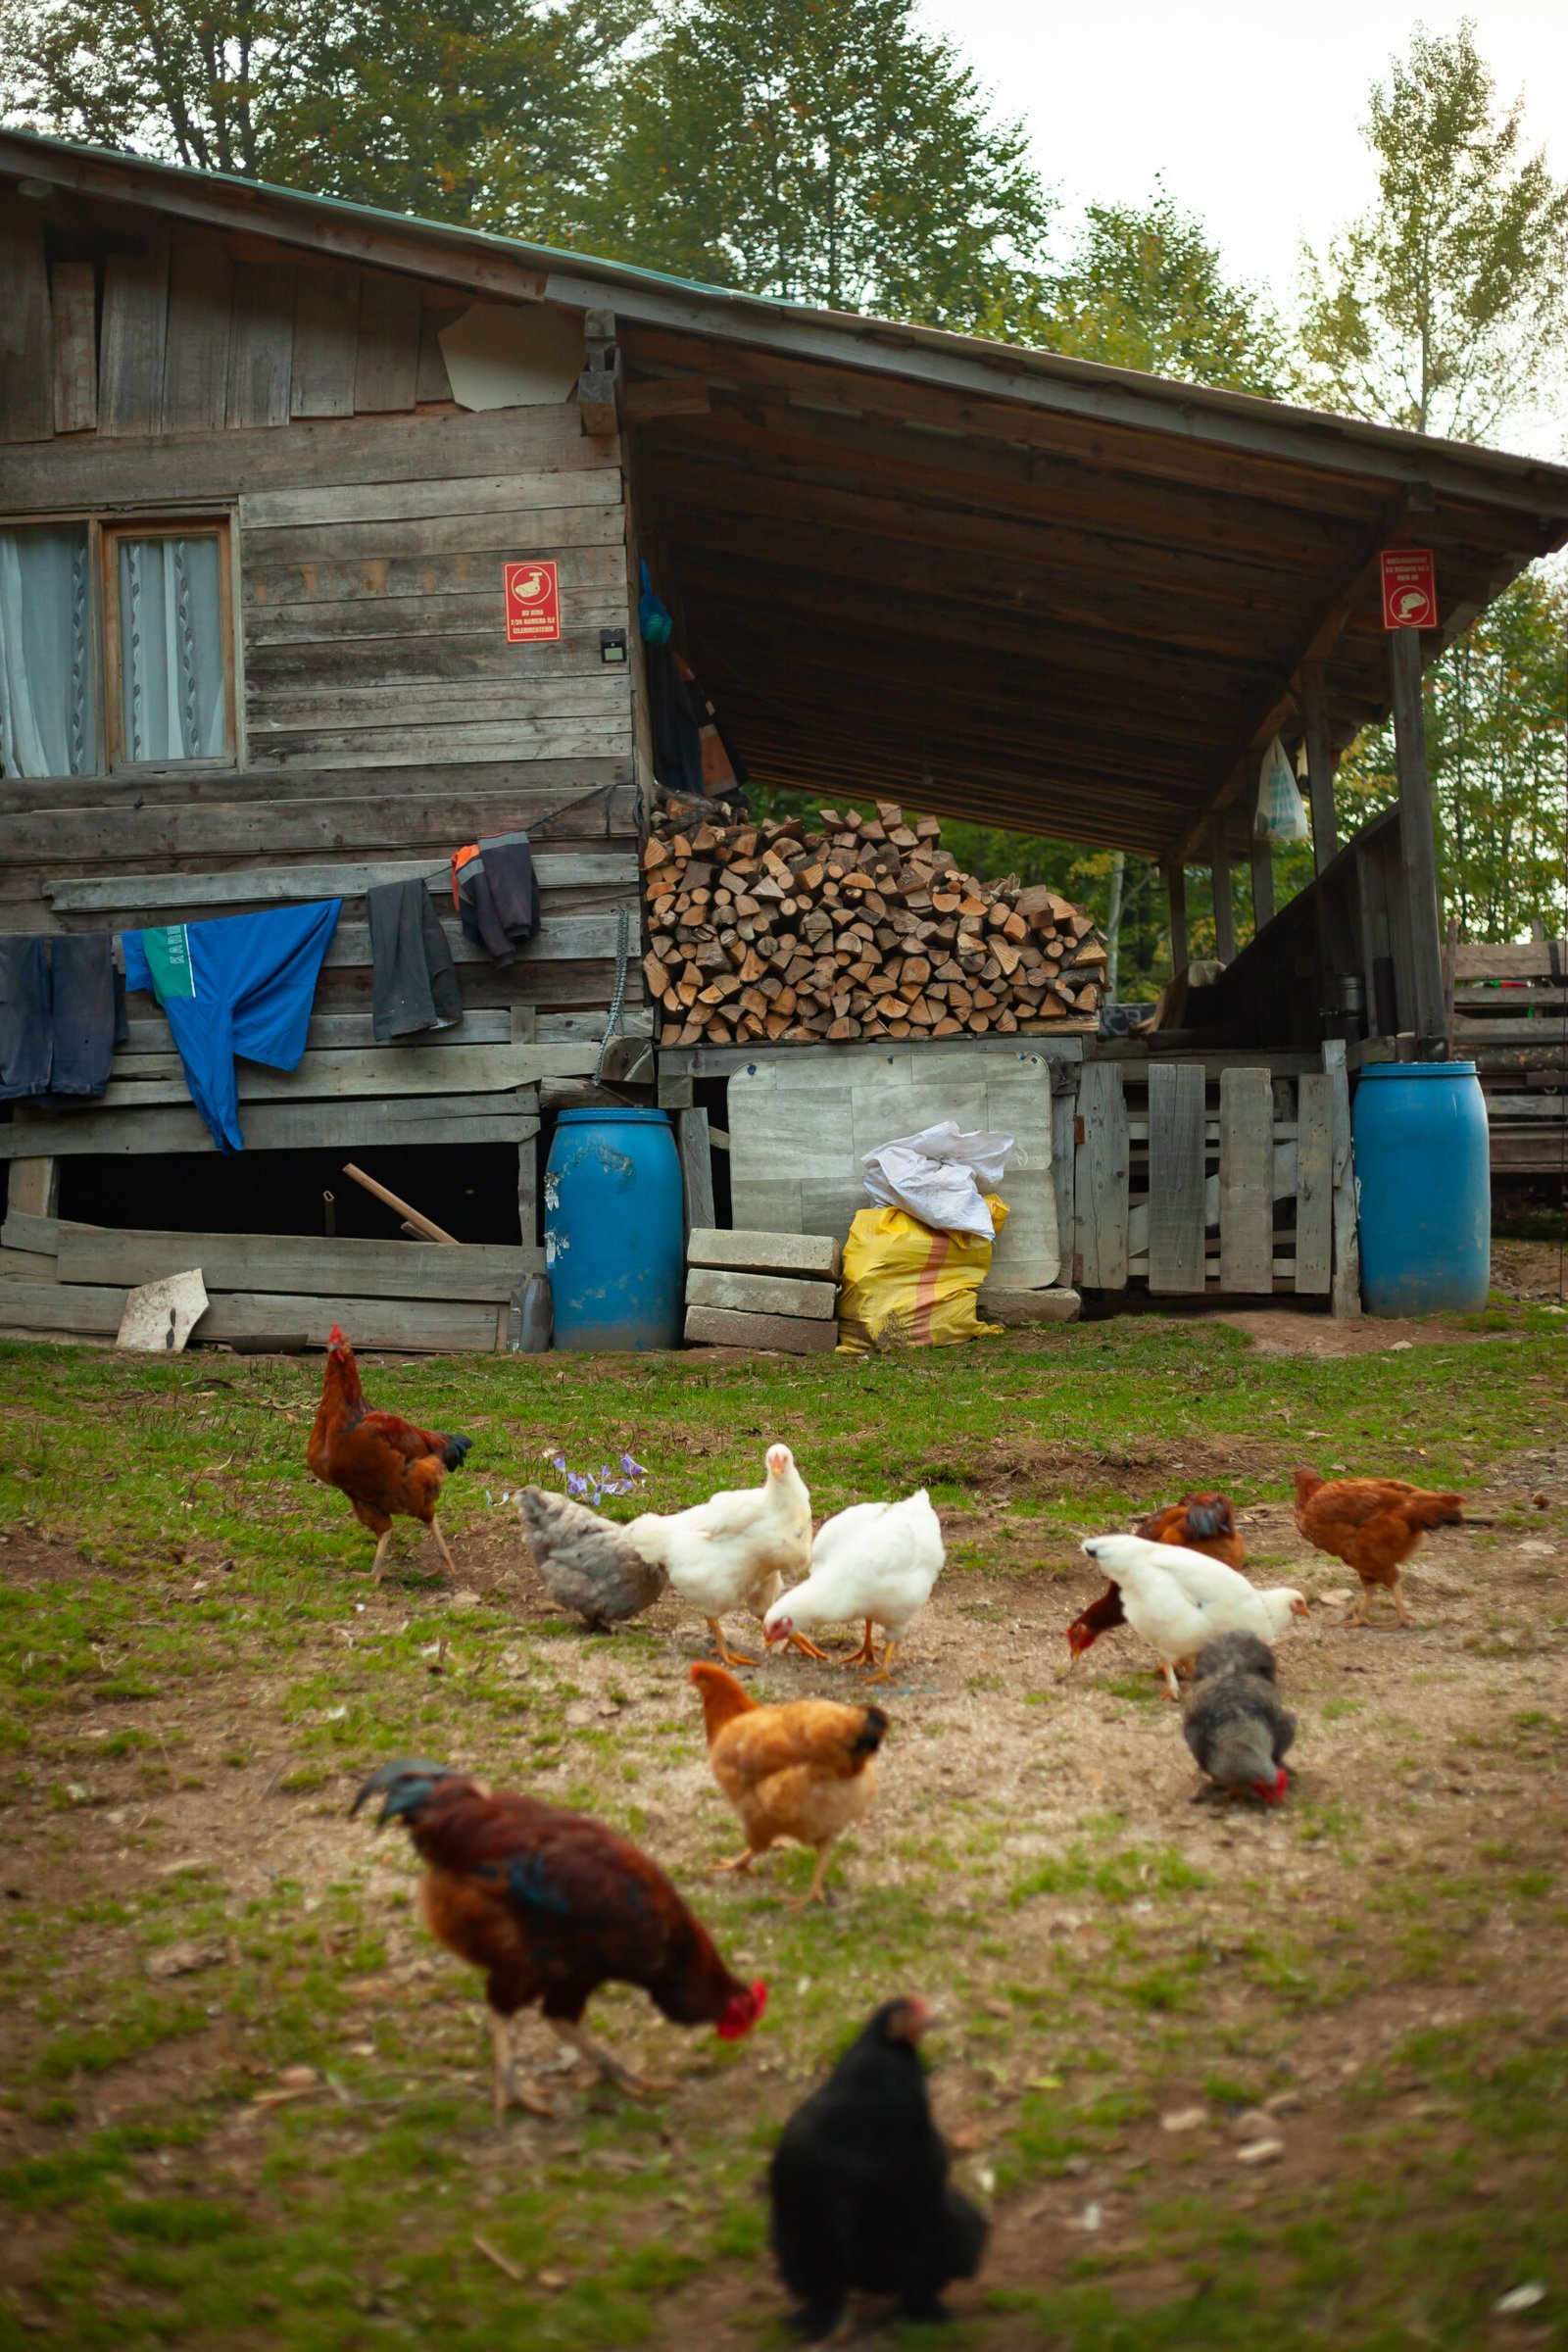 How Do You Deal With Bullying Or Aggression Among Chickens?